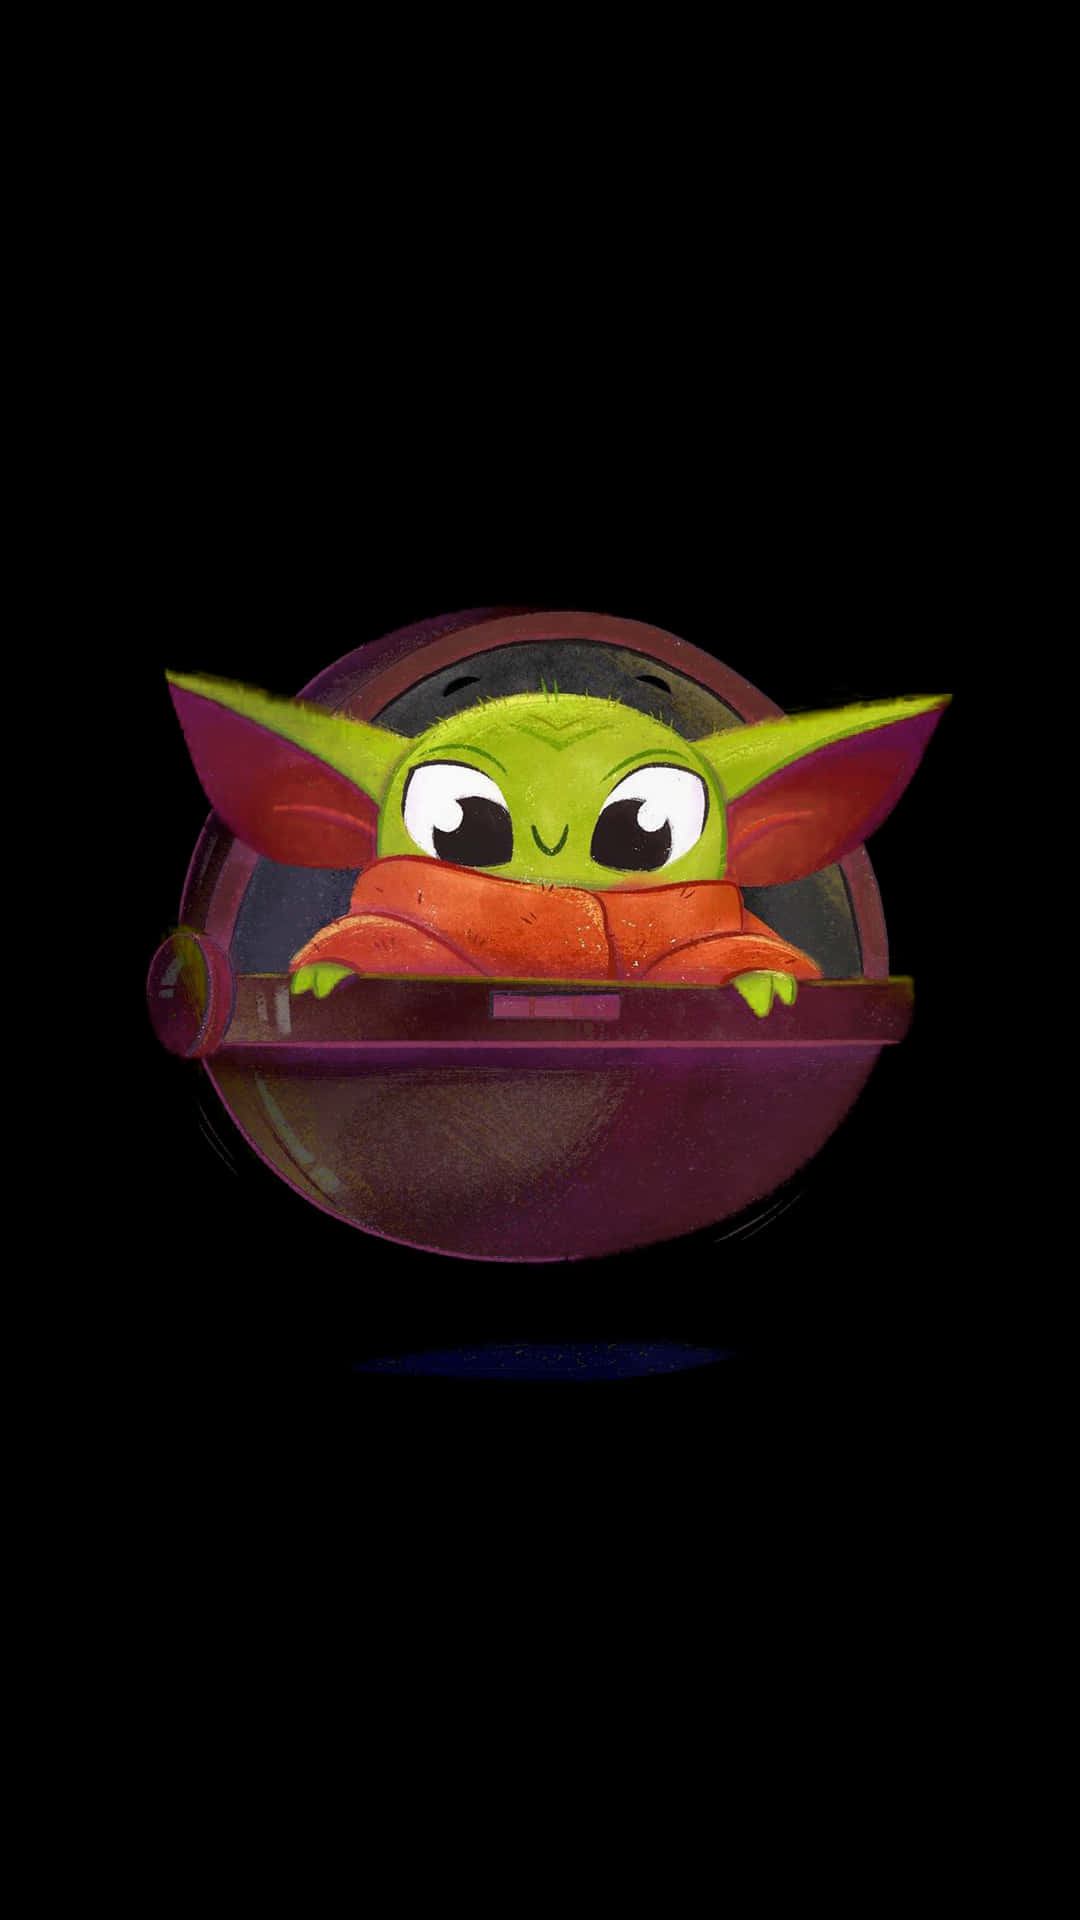 Image  Adorable Baby Yoda holding cell phone Wallpaper